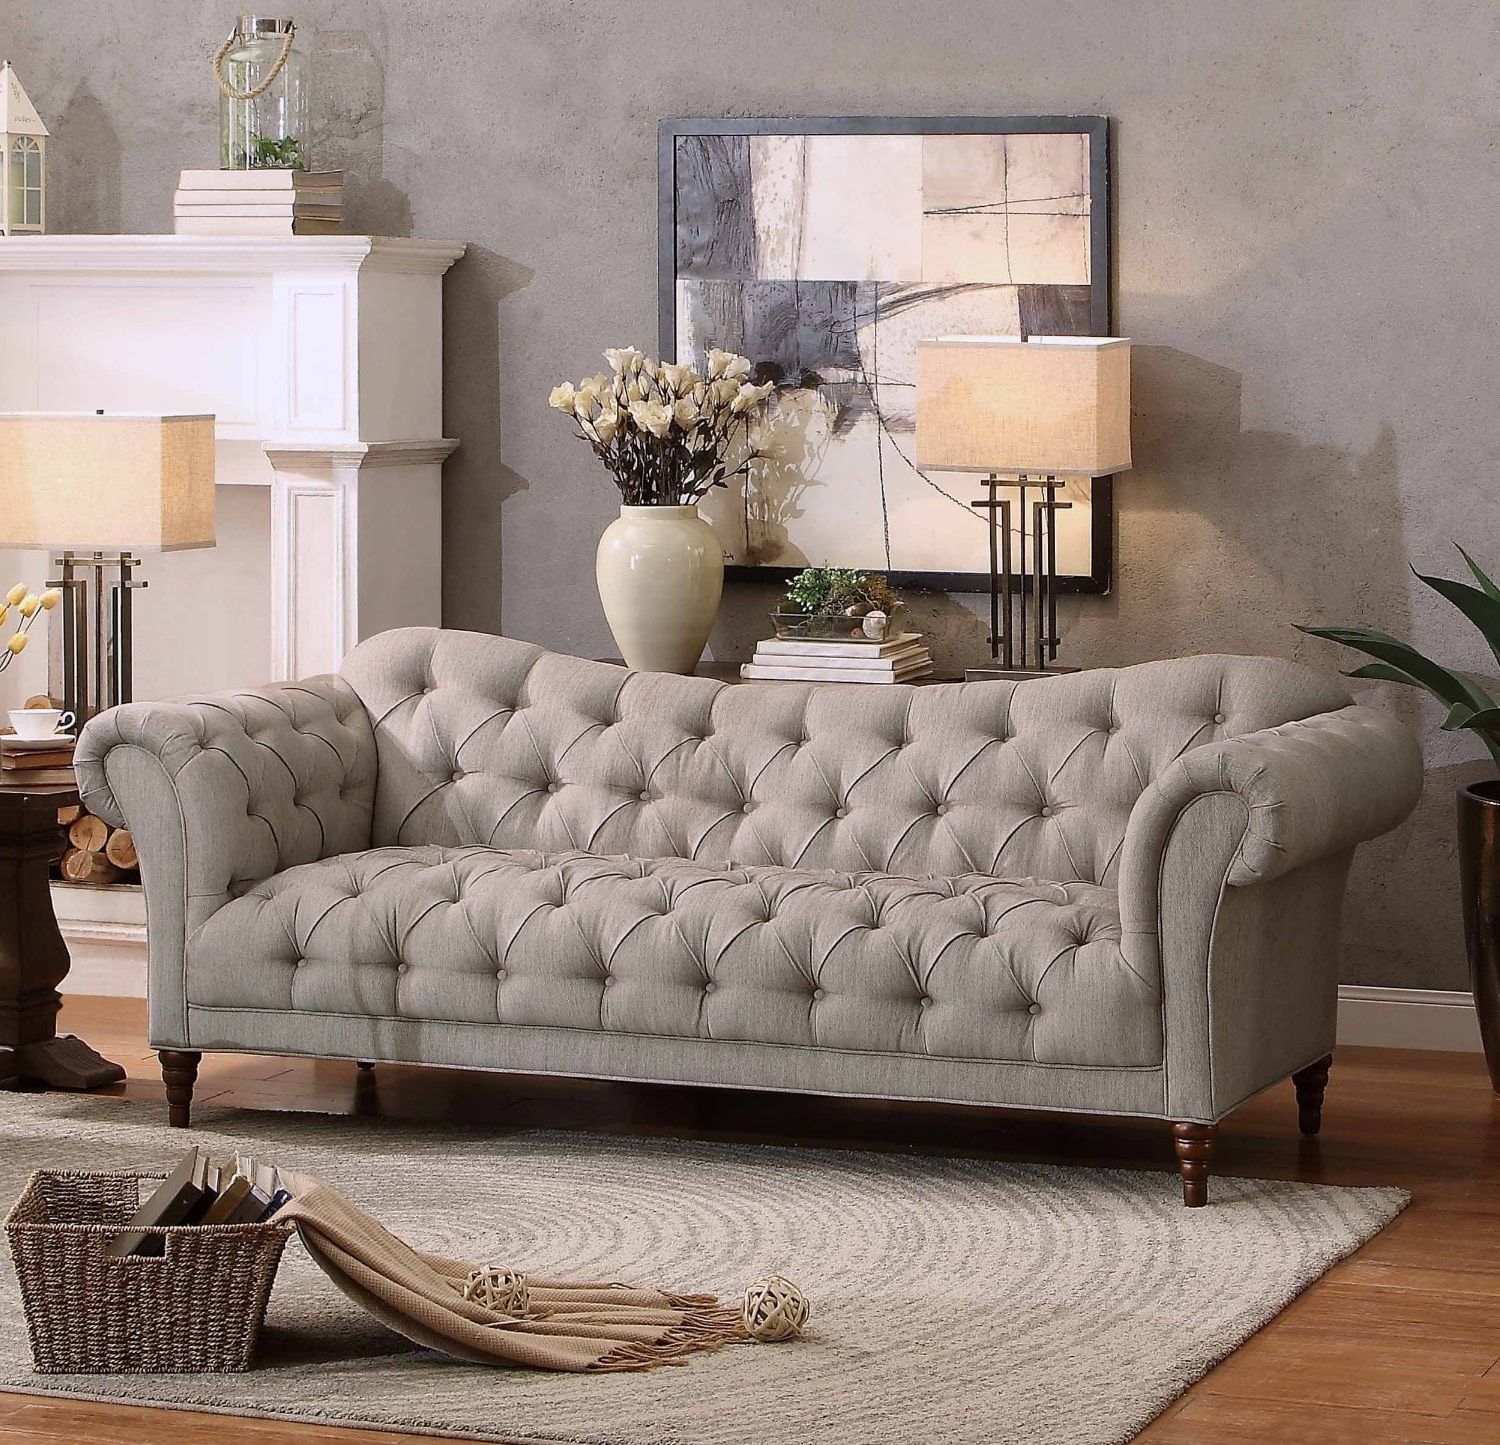 25 Best Chesterfield Sofas To Buy In 2016 For Chesterfield Sofas (View 3 of 20)